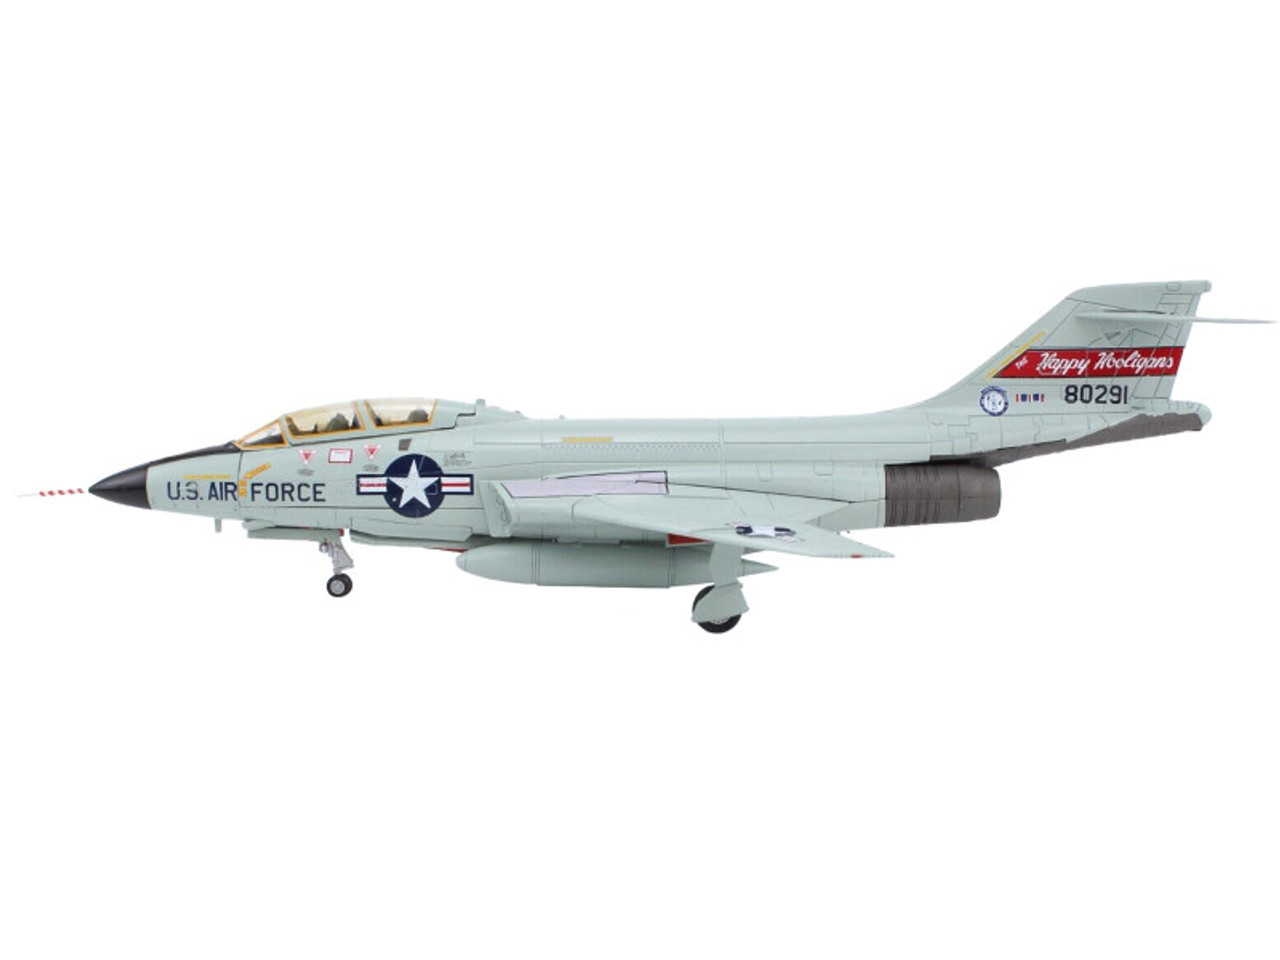 McDonnell RF-101B Voodoo Fighter Aircraft "The Happy Hooligans" (1975) United States Air Force "Air Power Series" 1/72 Diecast Model by Hobby Master